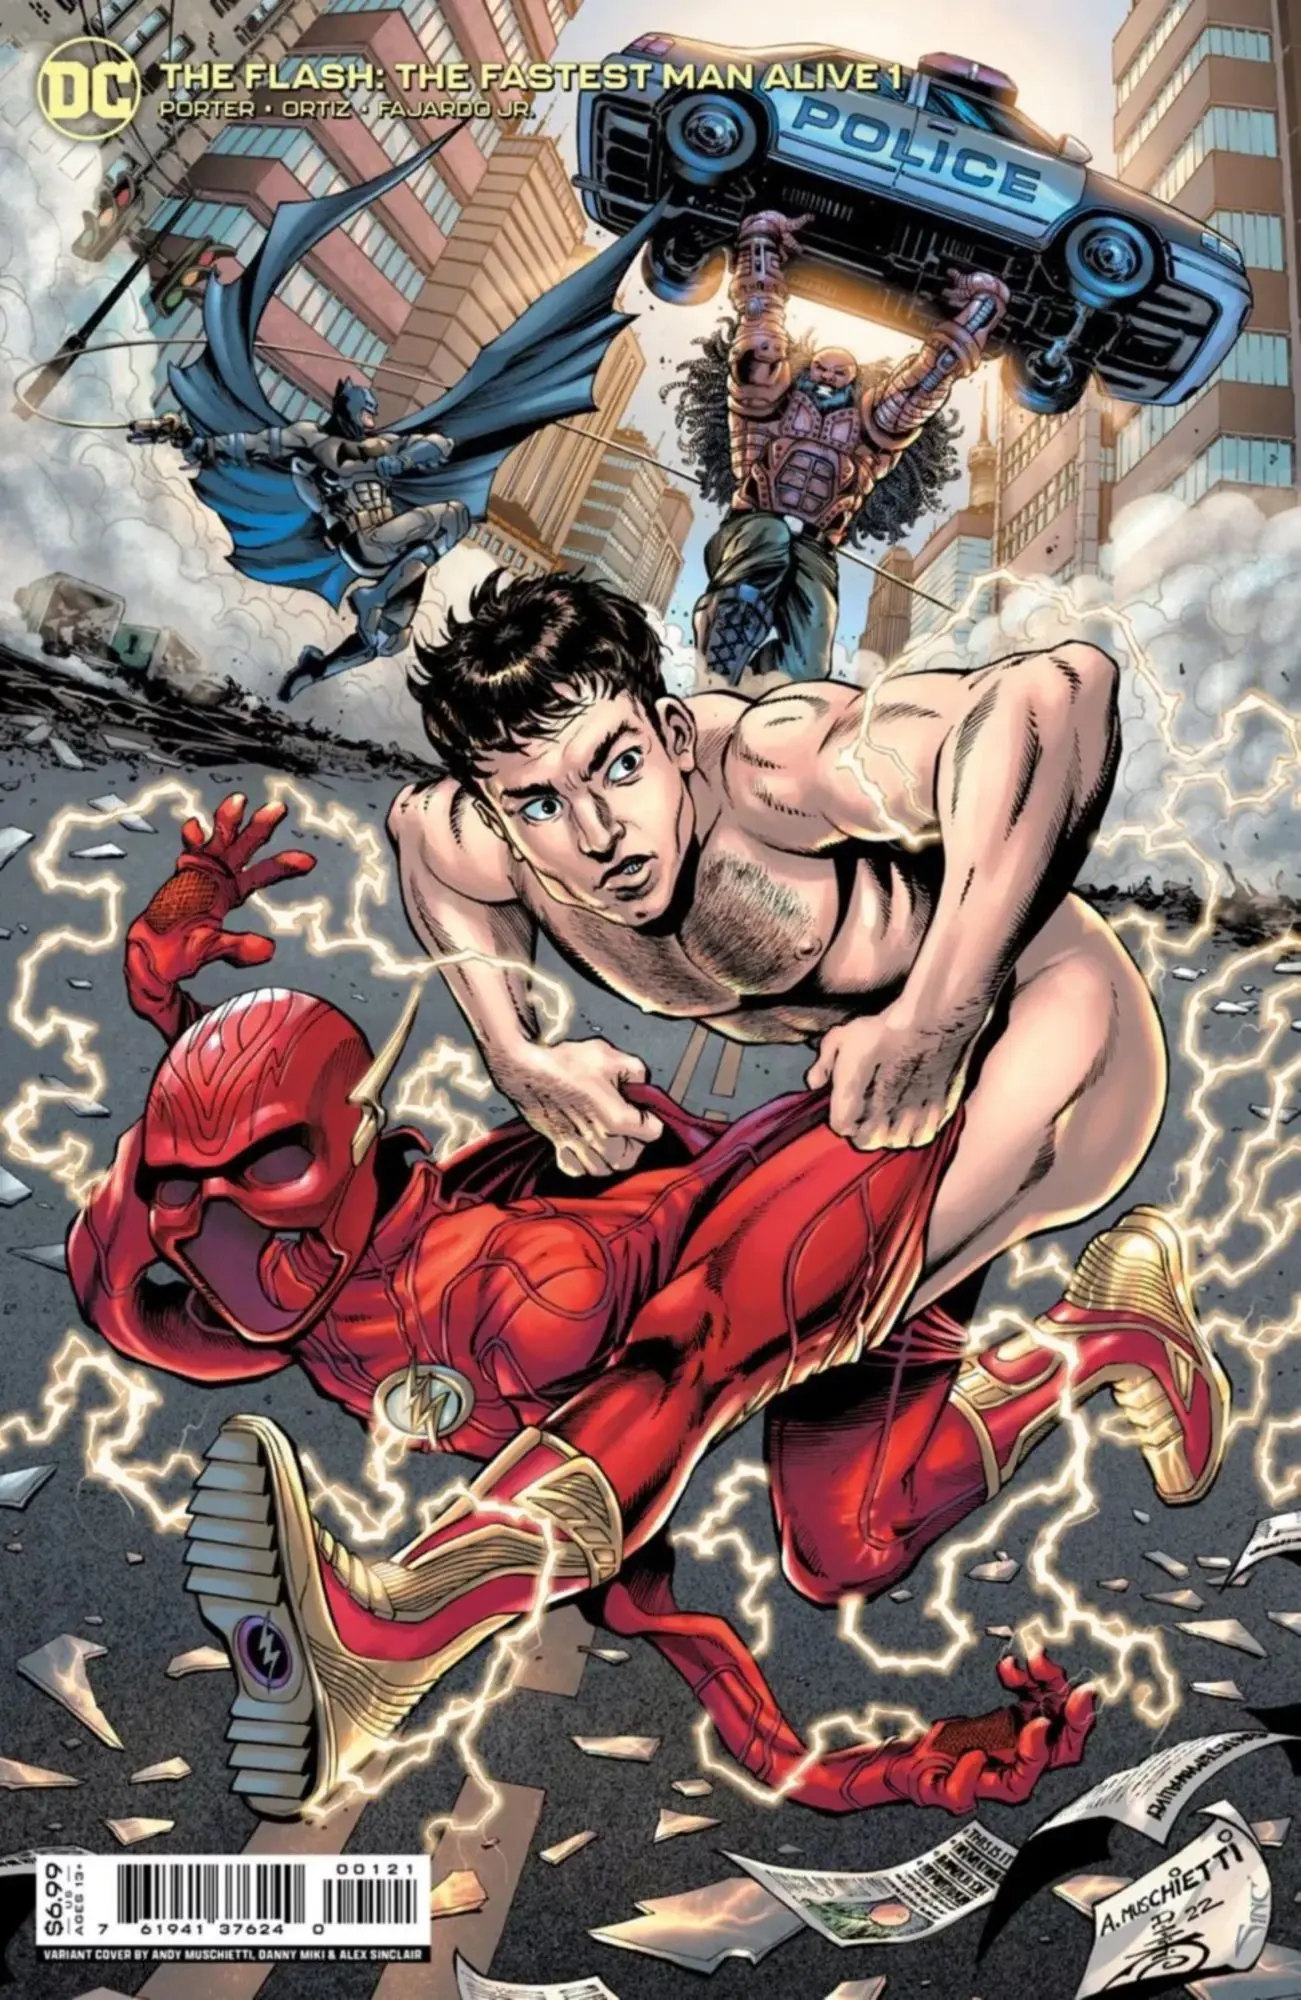 The Flash suits up to assist Batman against Girder on Andy Muschetti’s variant cover for The Flash: The Fastest Man Alive Vol. 2 #1 (2022), DC Comics.